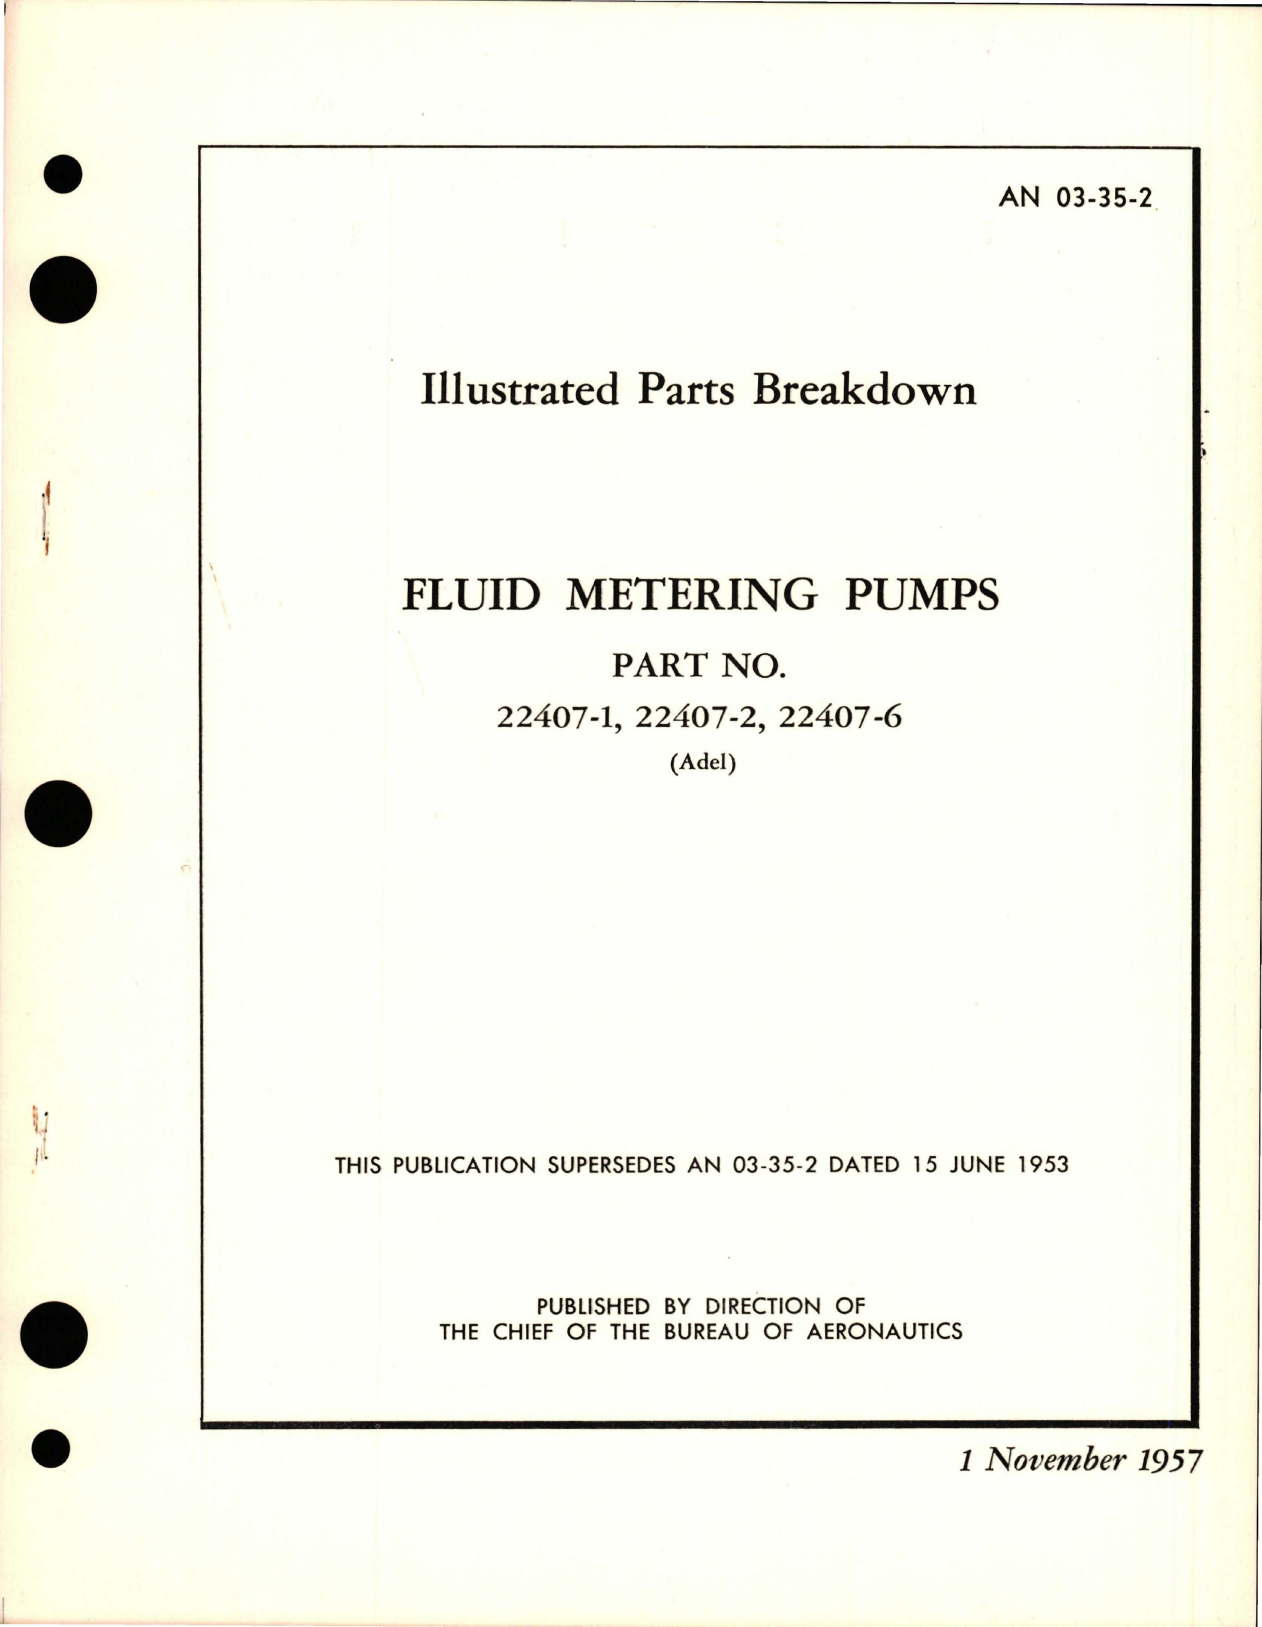 Sample page 1 from AirCorps Library document: Illustrated Parts Breakdown for Fluid Metering Pumps - Parts 22407-1, 22407-2, and 22407-6 